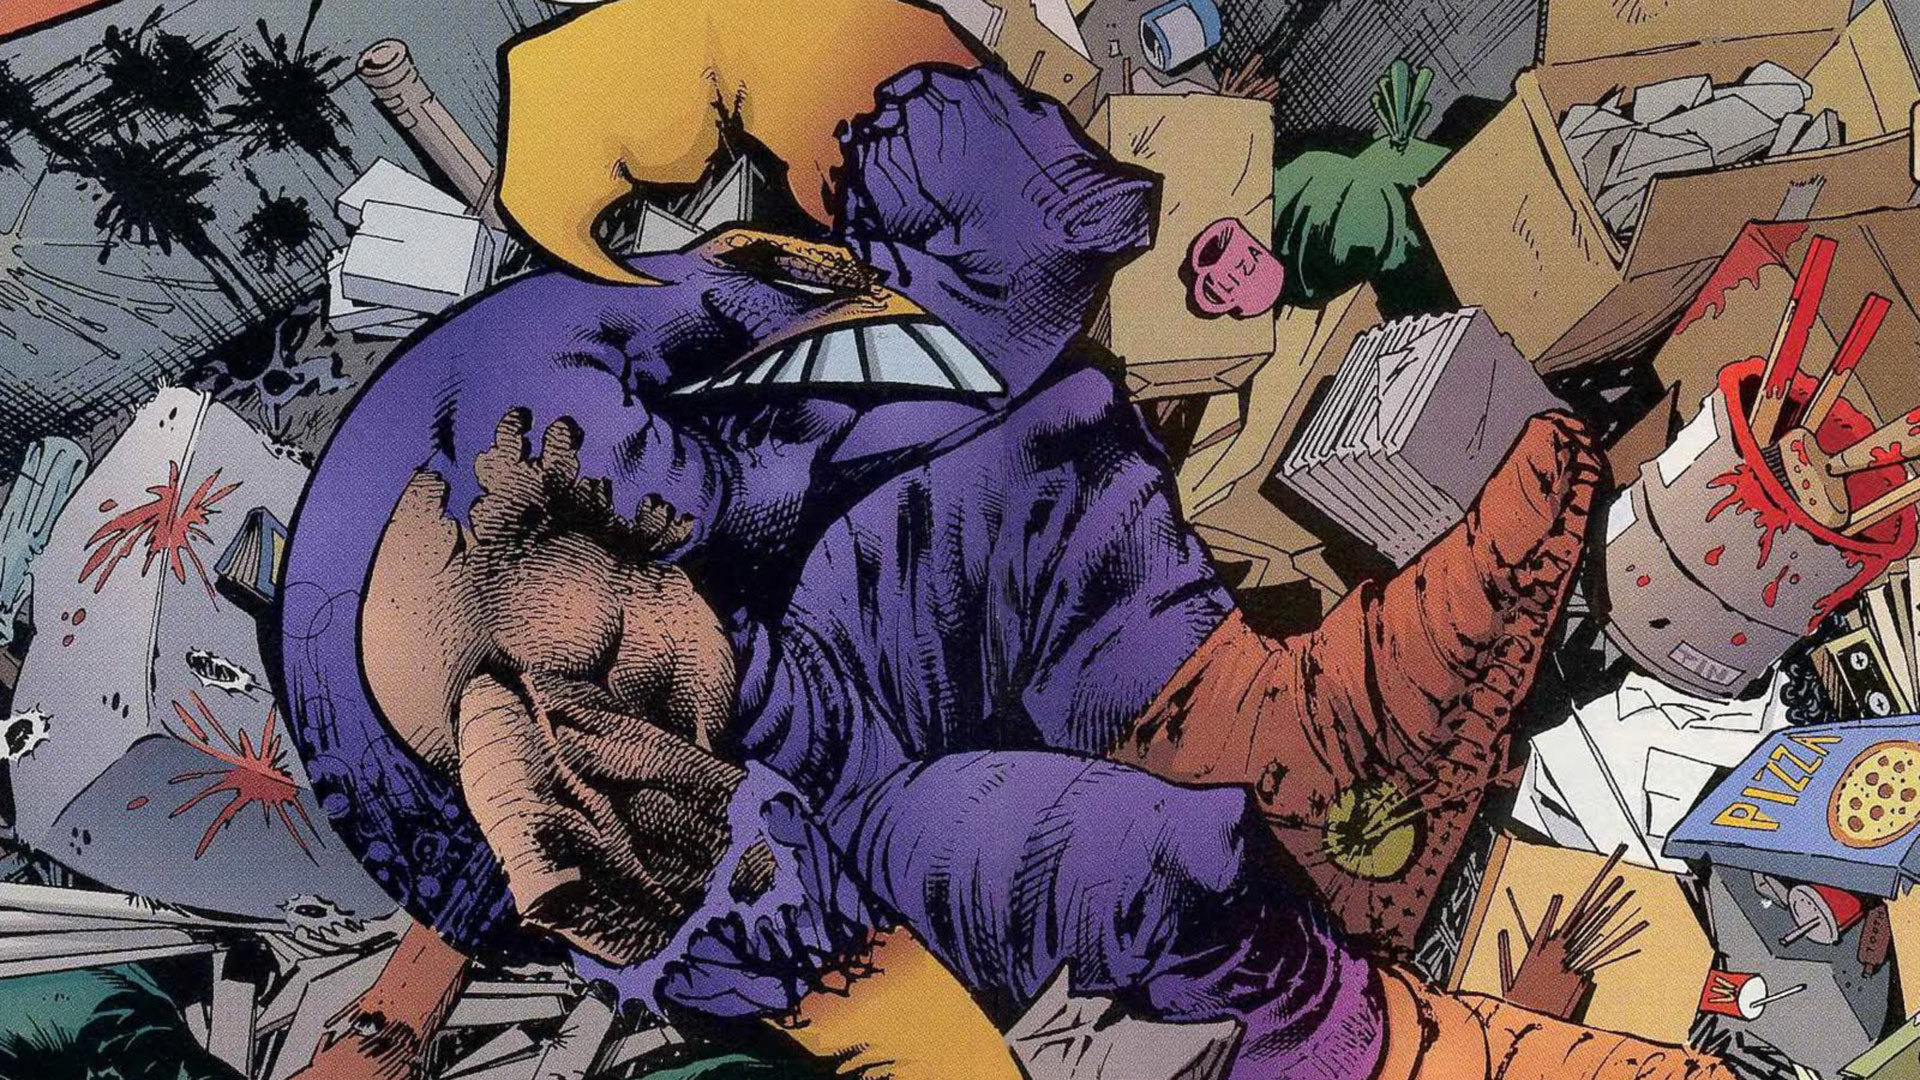 Image Comics' The Maxx was adapted into an animated series as part of ...